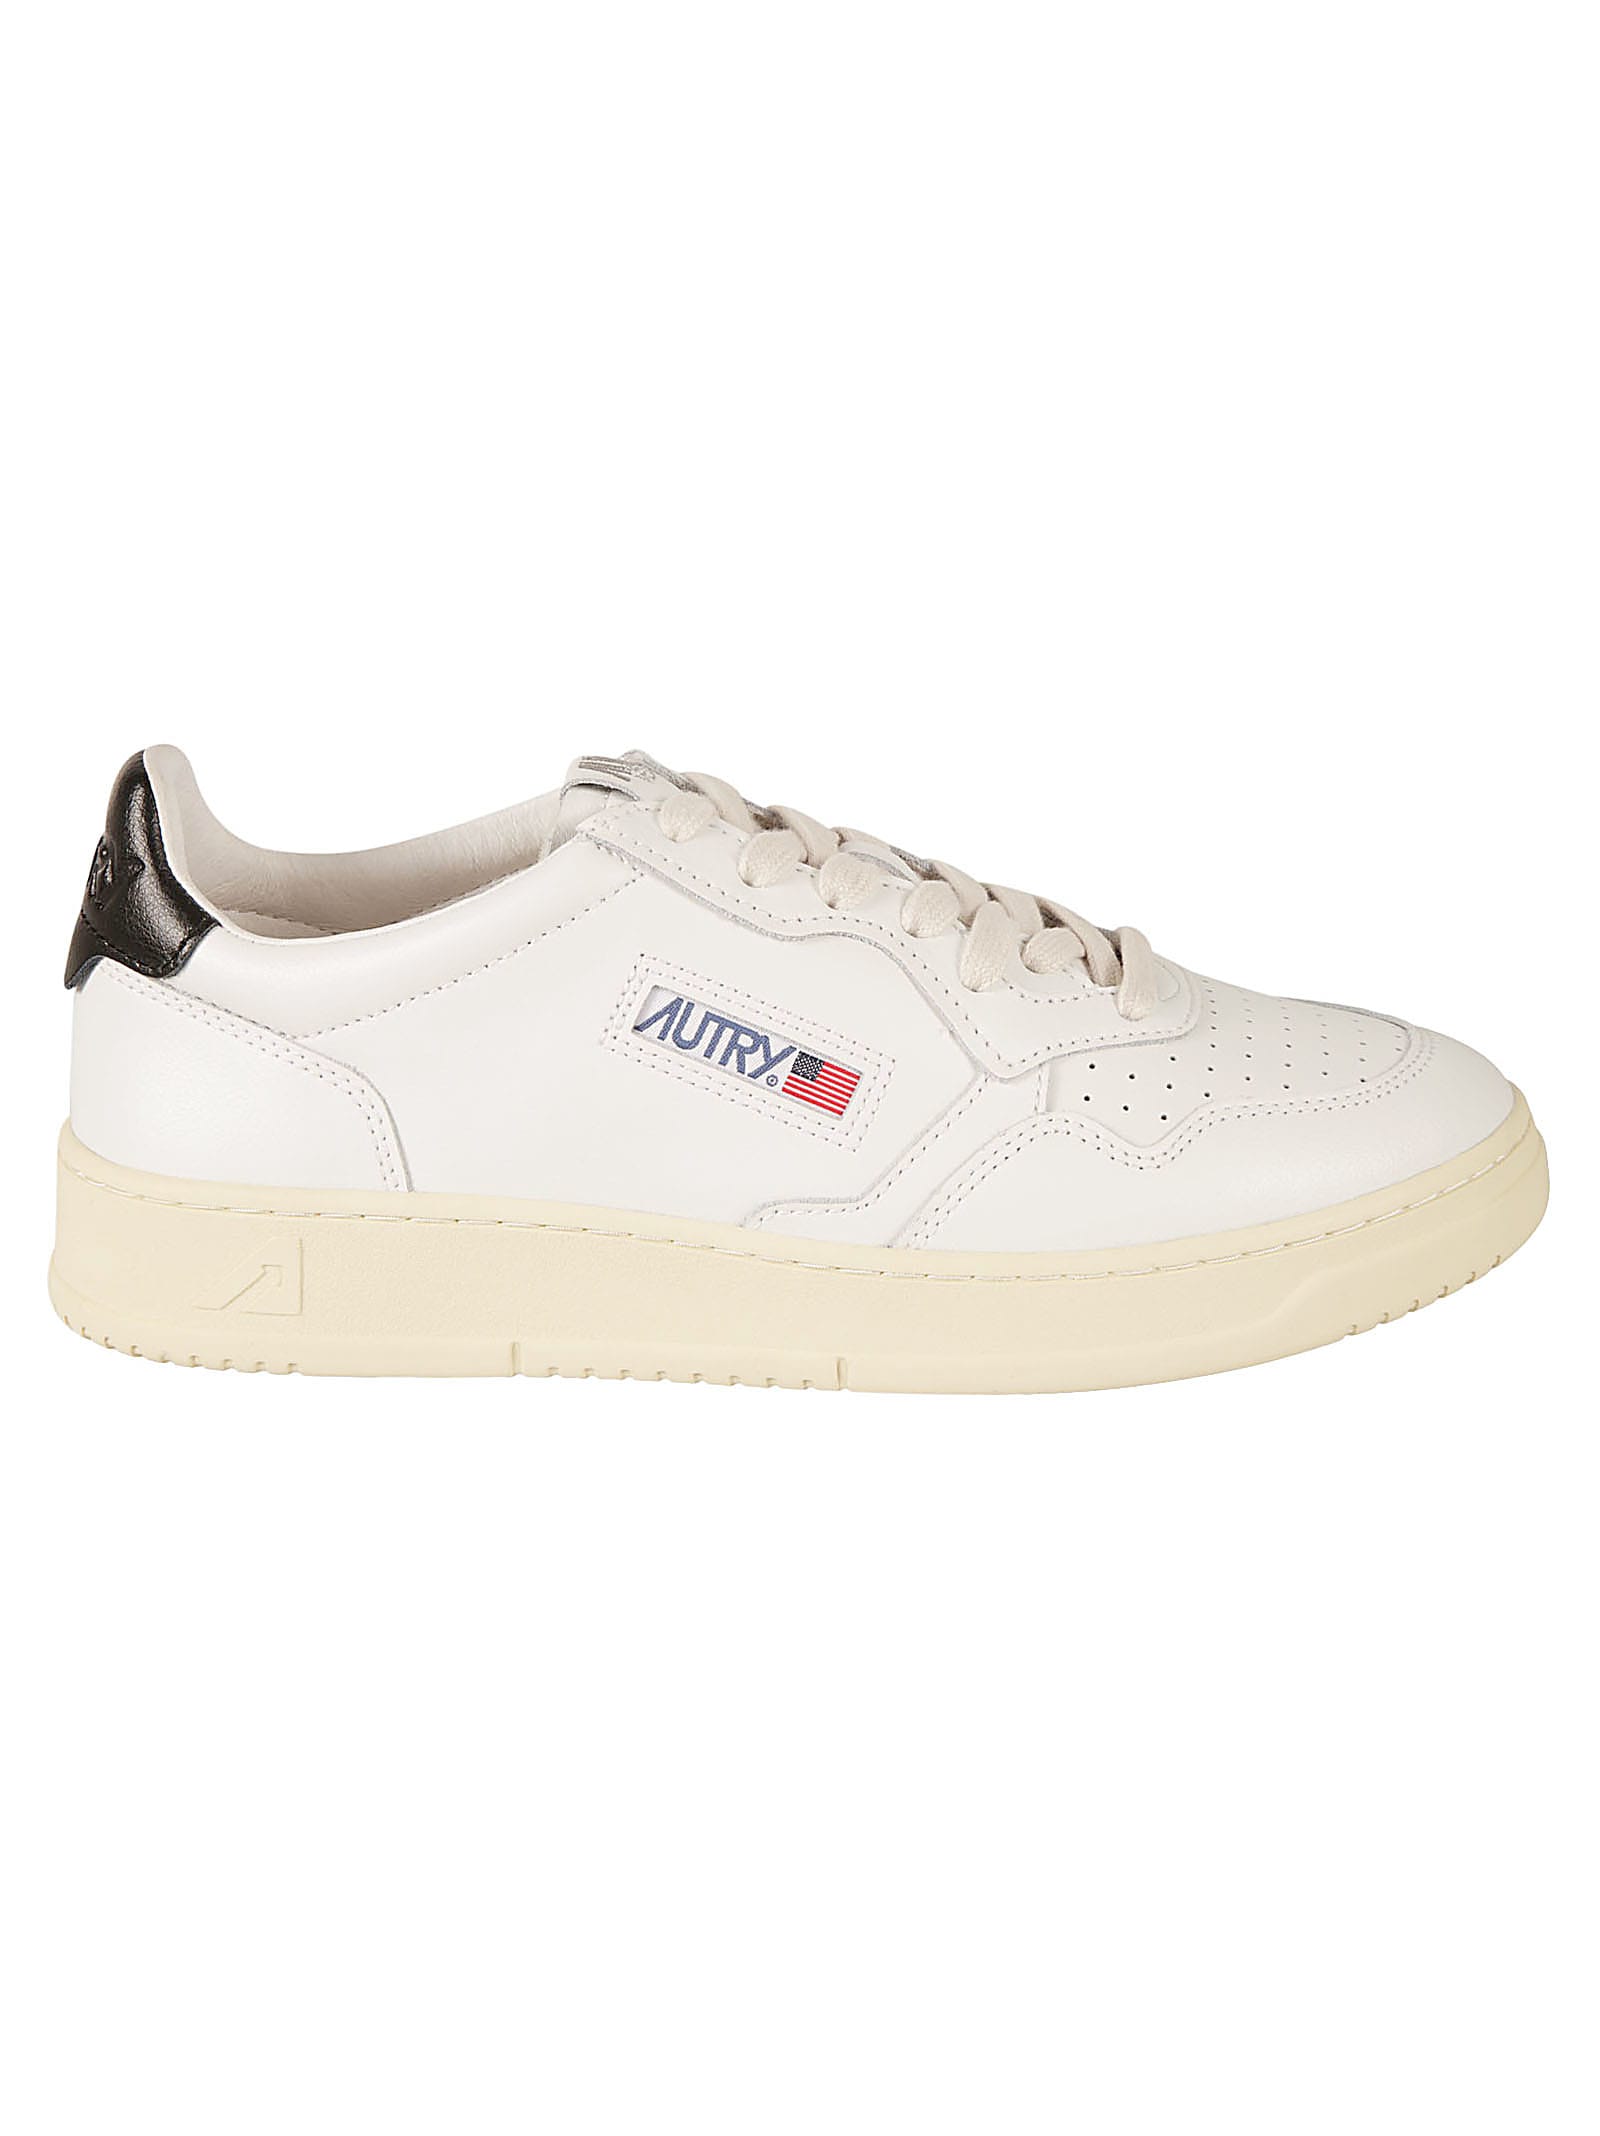 Autry Medalist Low Sneakers In White/black